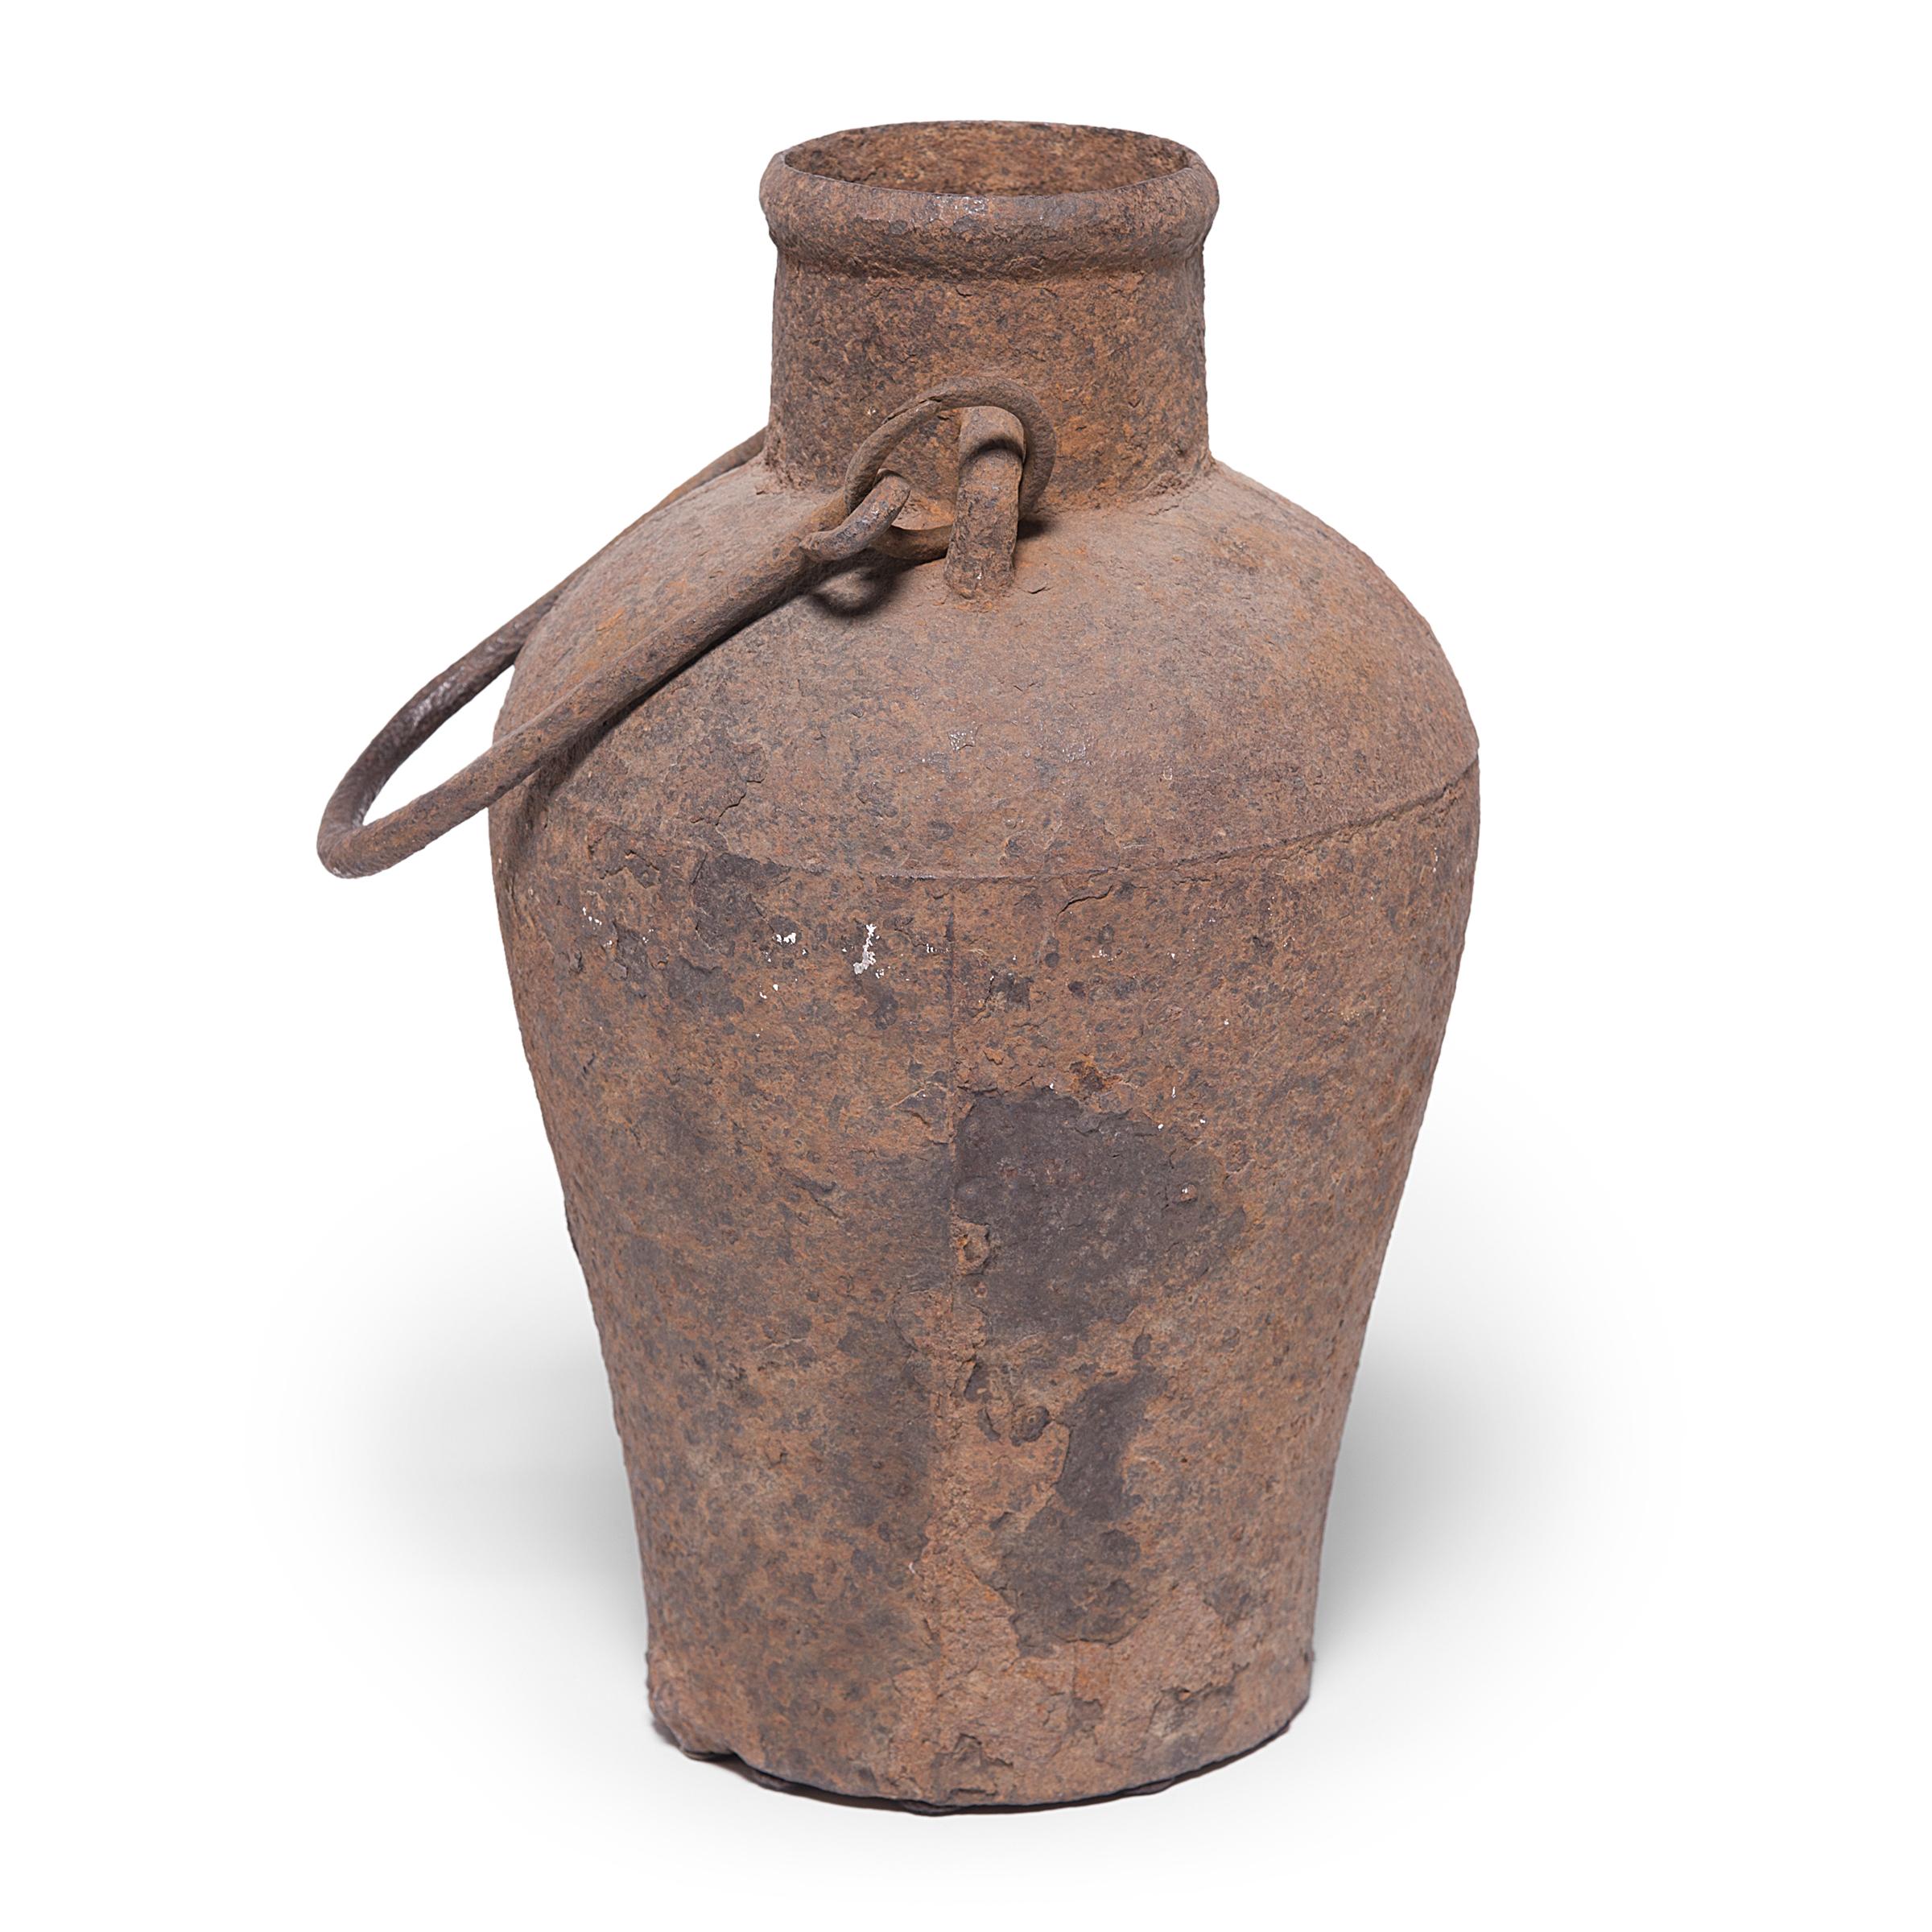 Rustic Chinese Cast Iron Vessel, c. 1850 For Sale